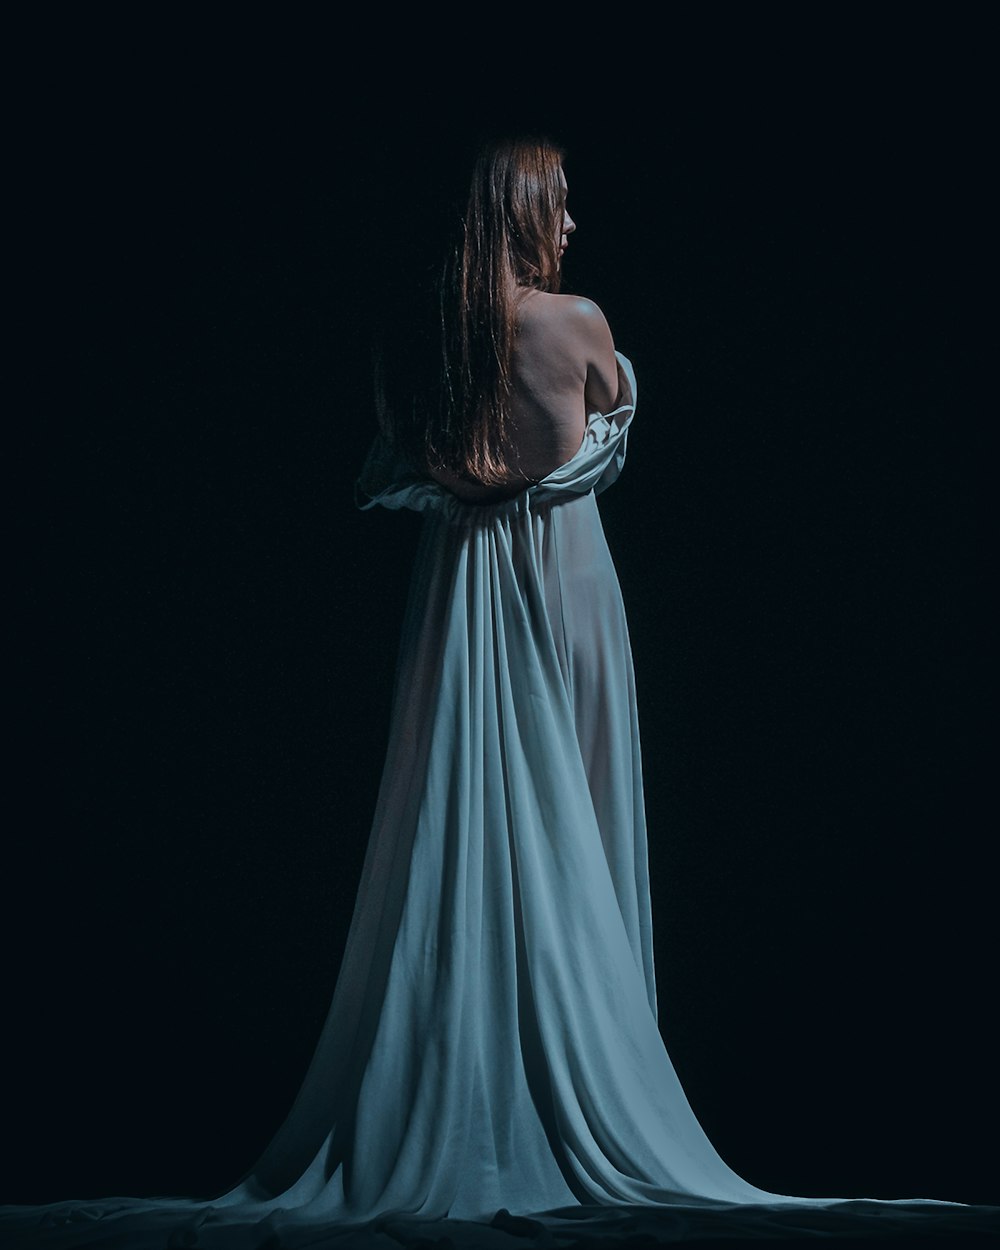 a woman in a blue dress standing in the dark